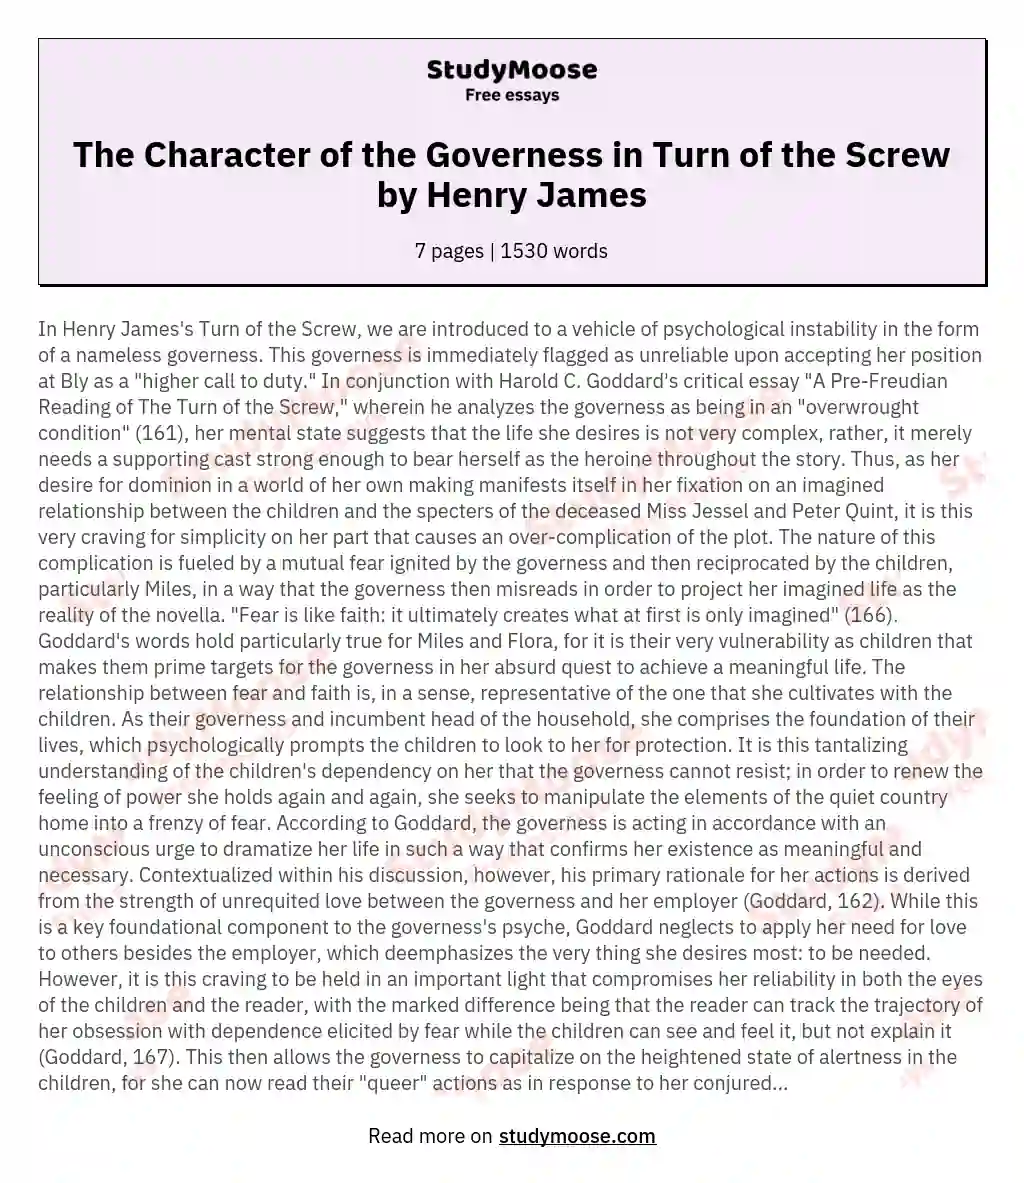 The Character of the Governess in Turn of the Screw by Henry James